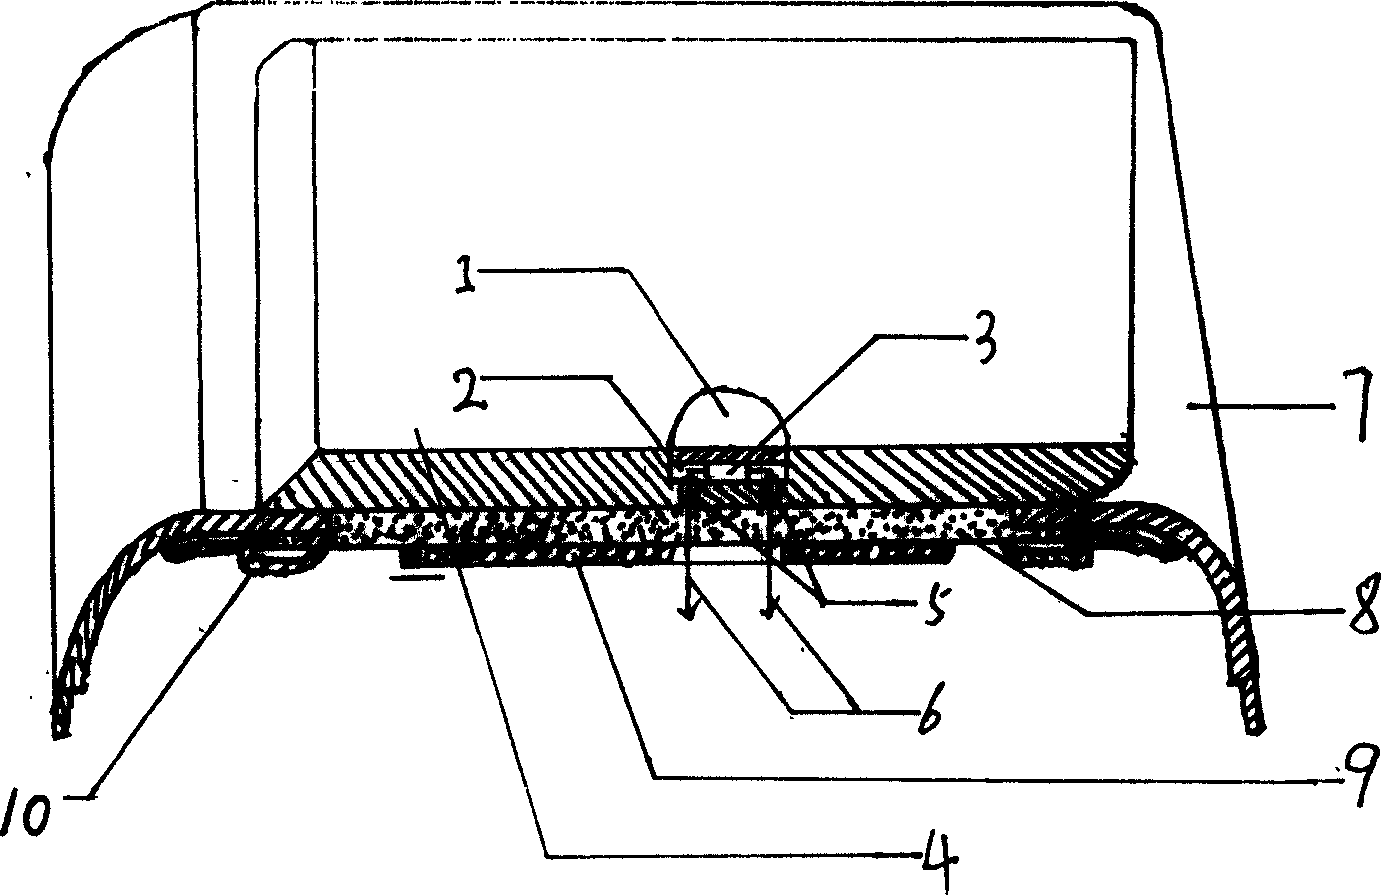 Temperature-sensing device structure of electromagnetic heater